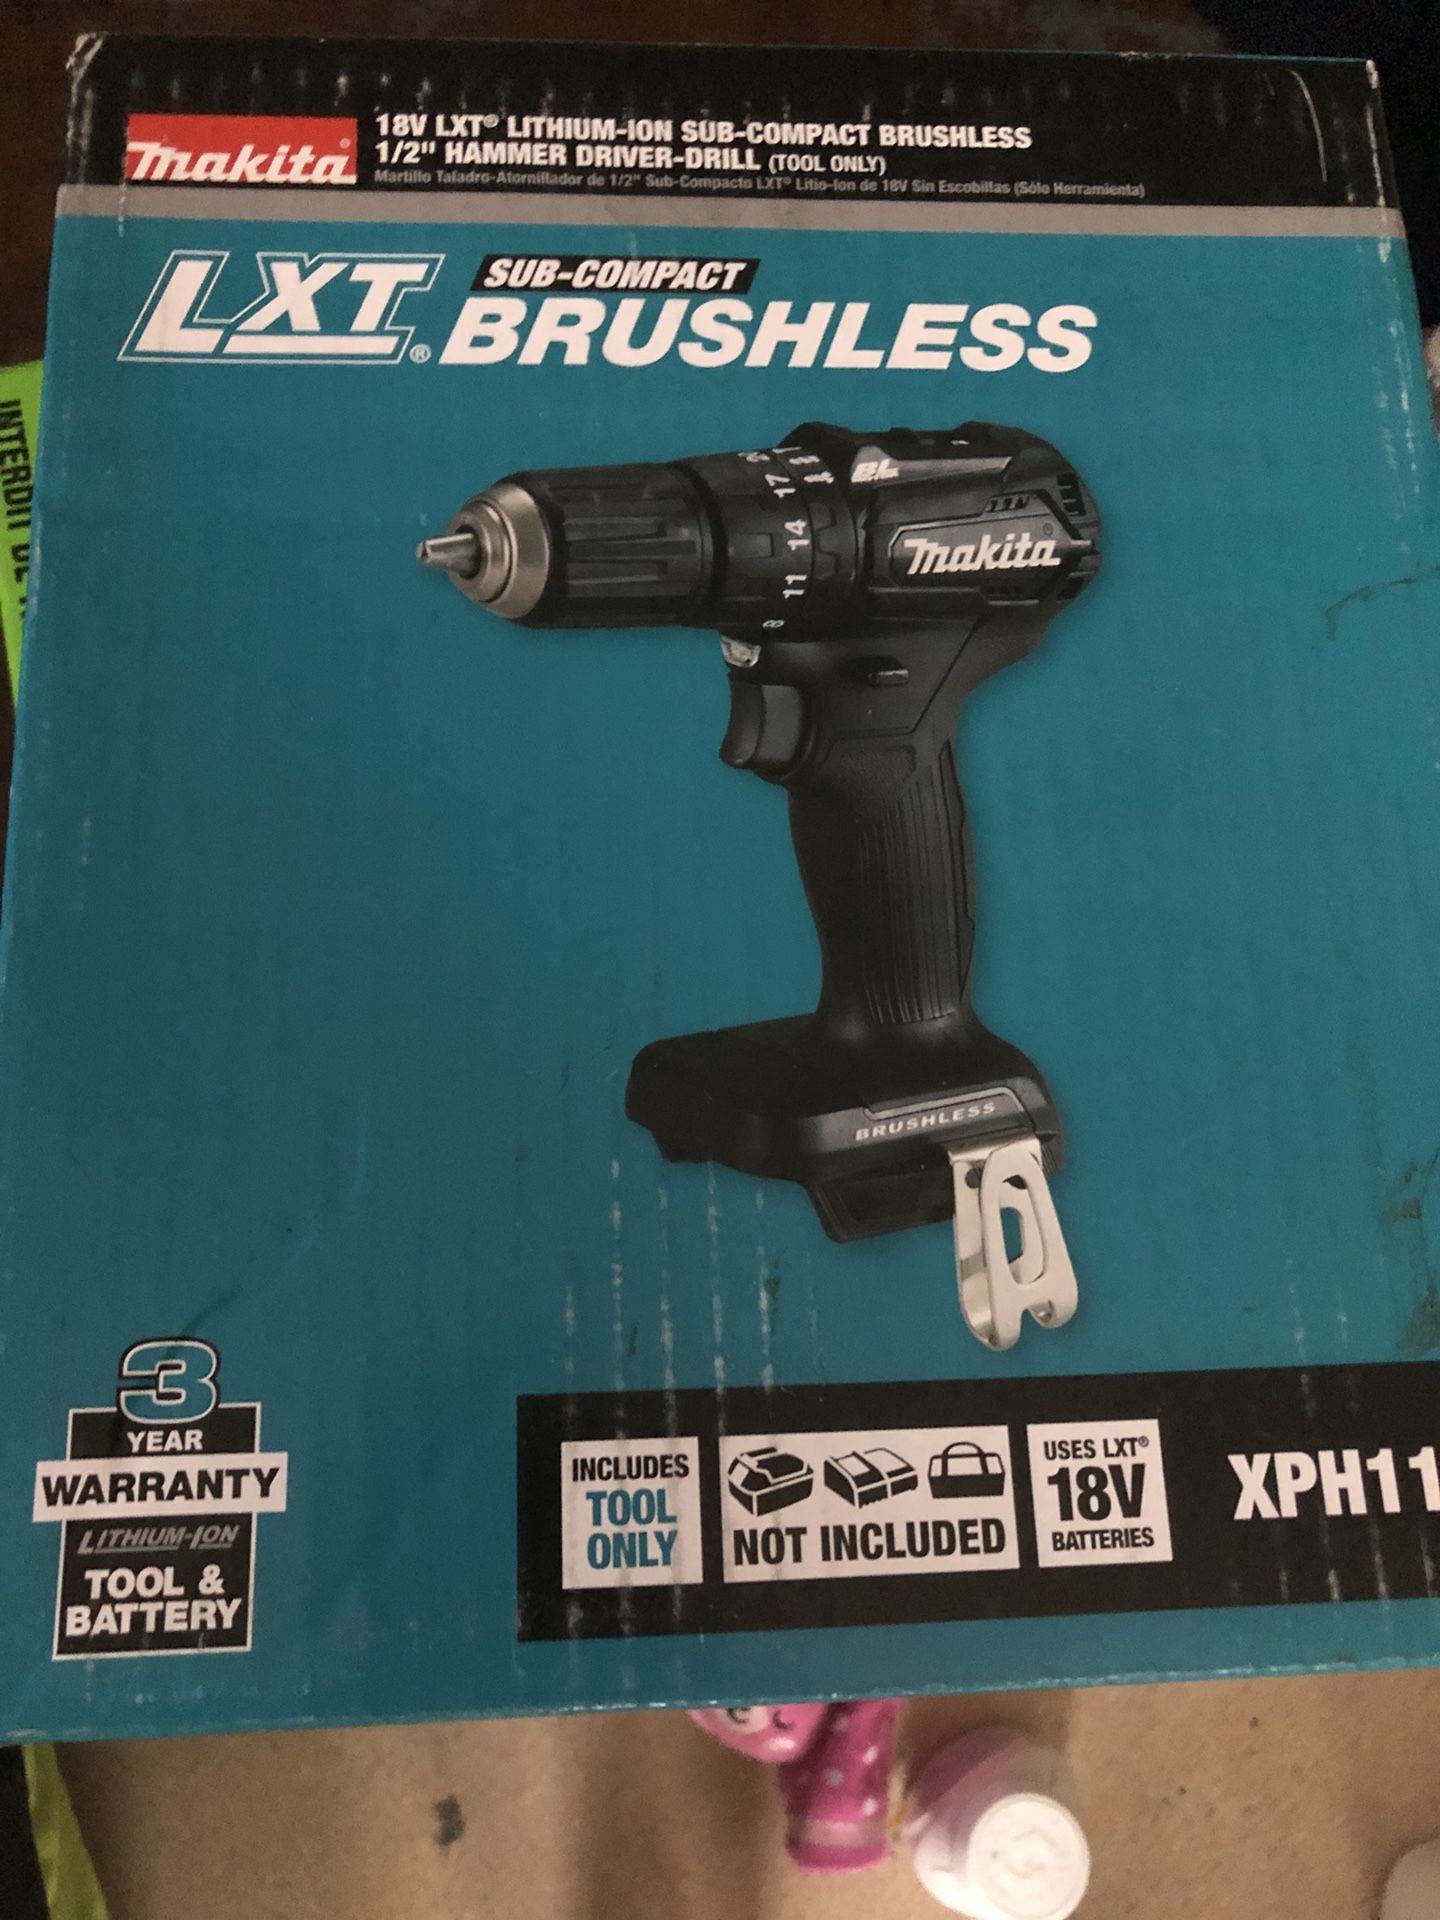 Brand new never used Makita let sub compact brushless hammer drill/driver